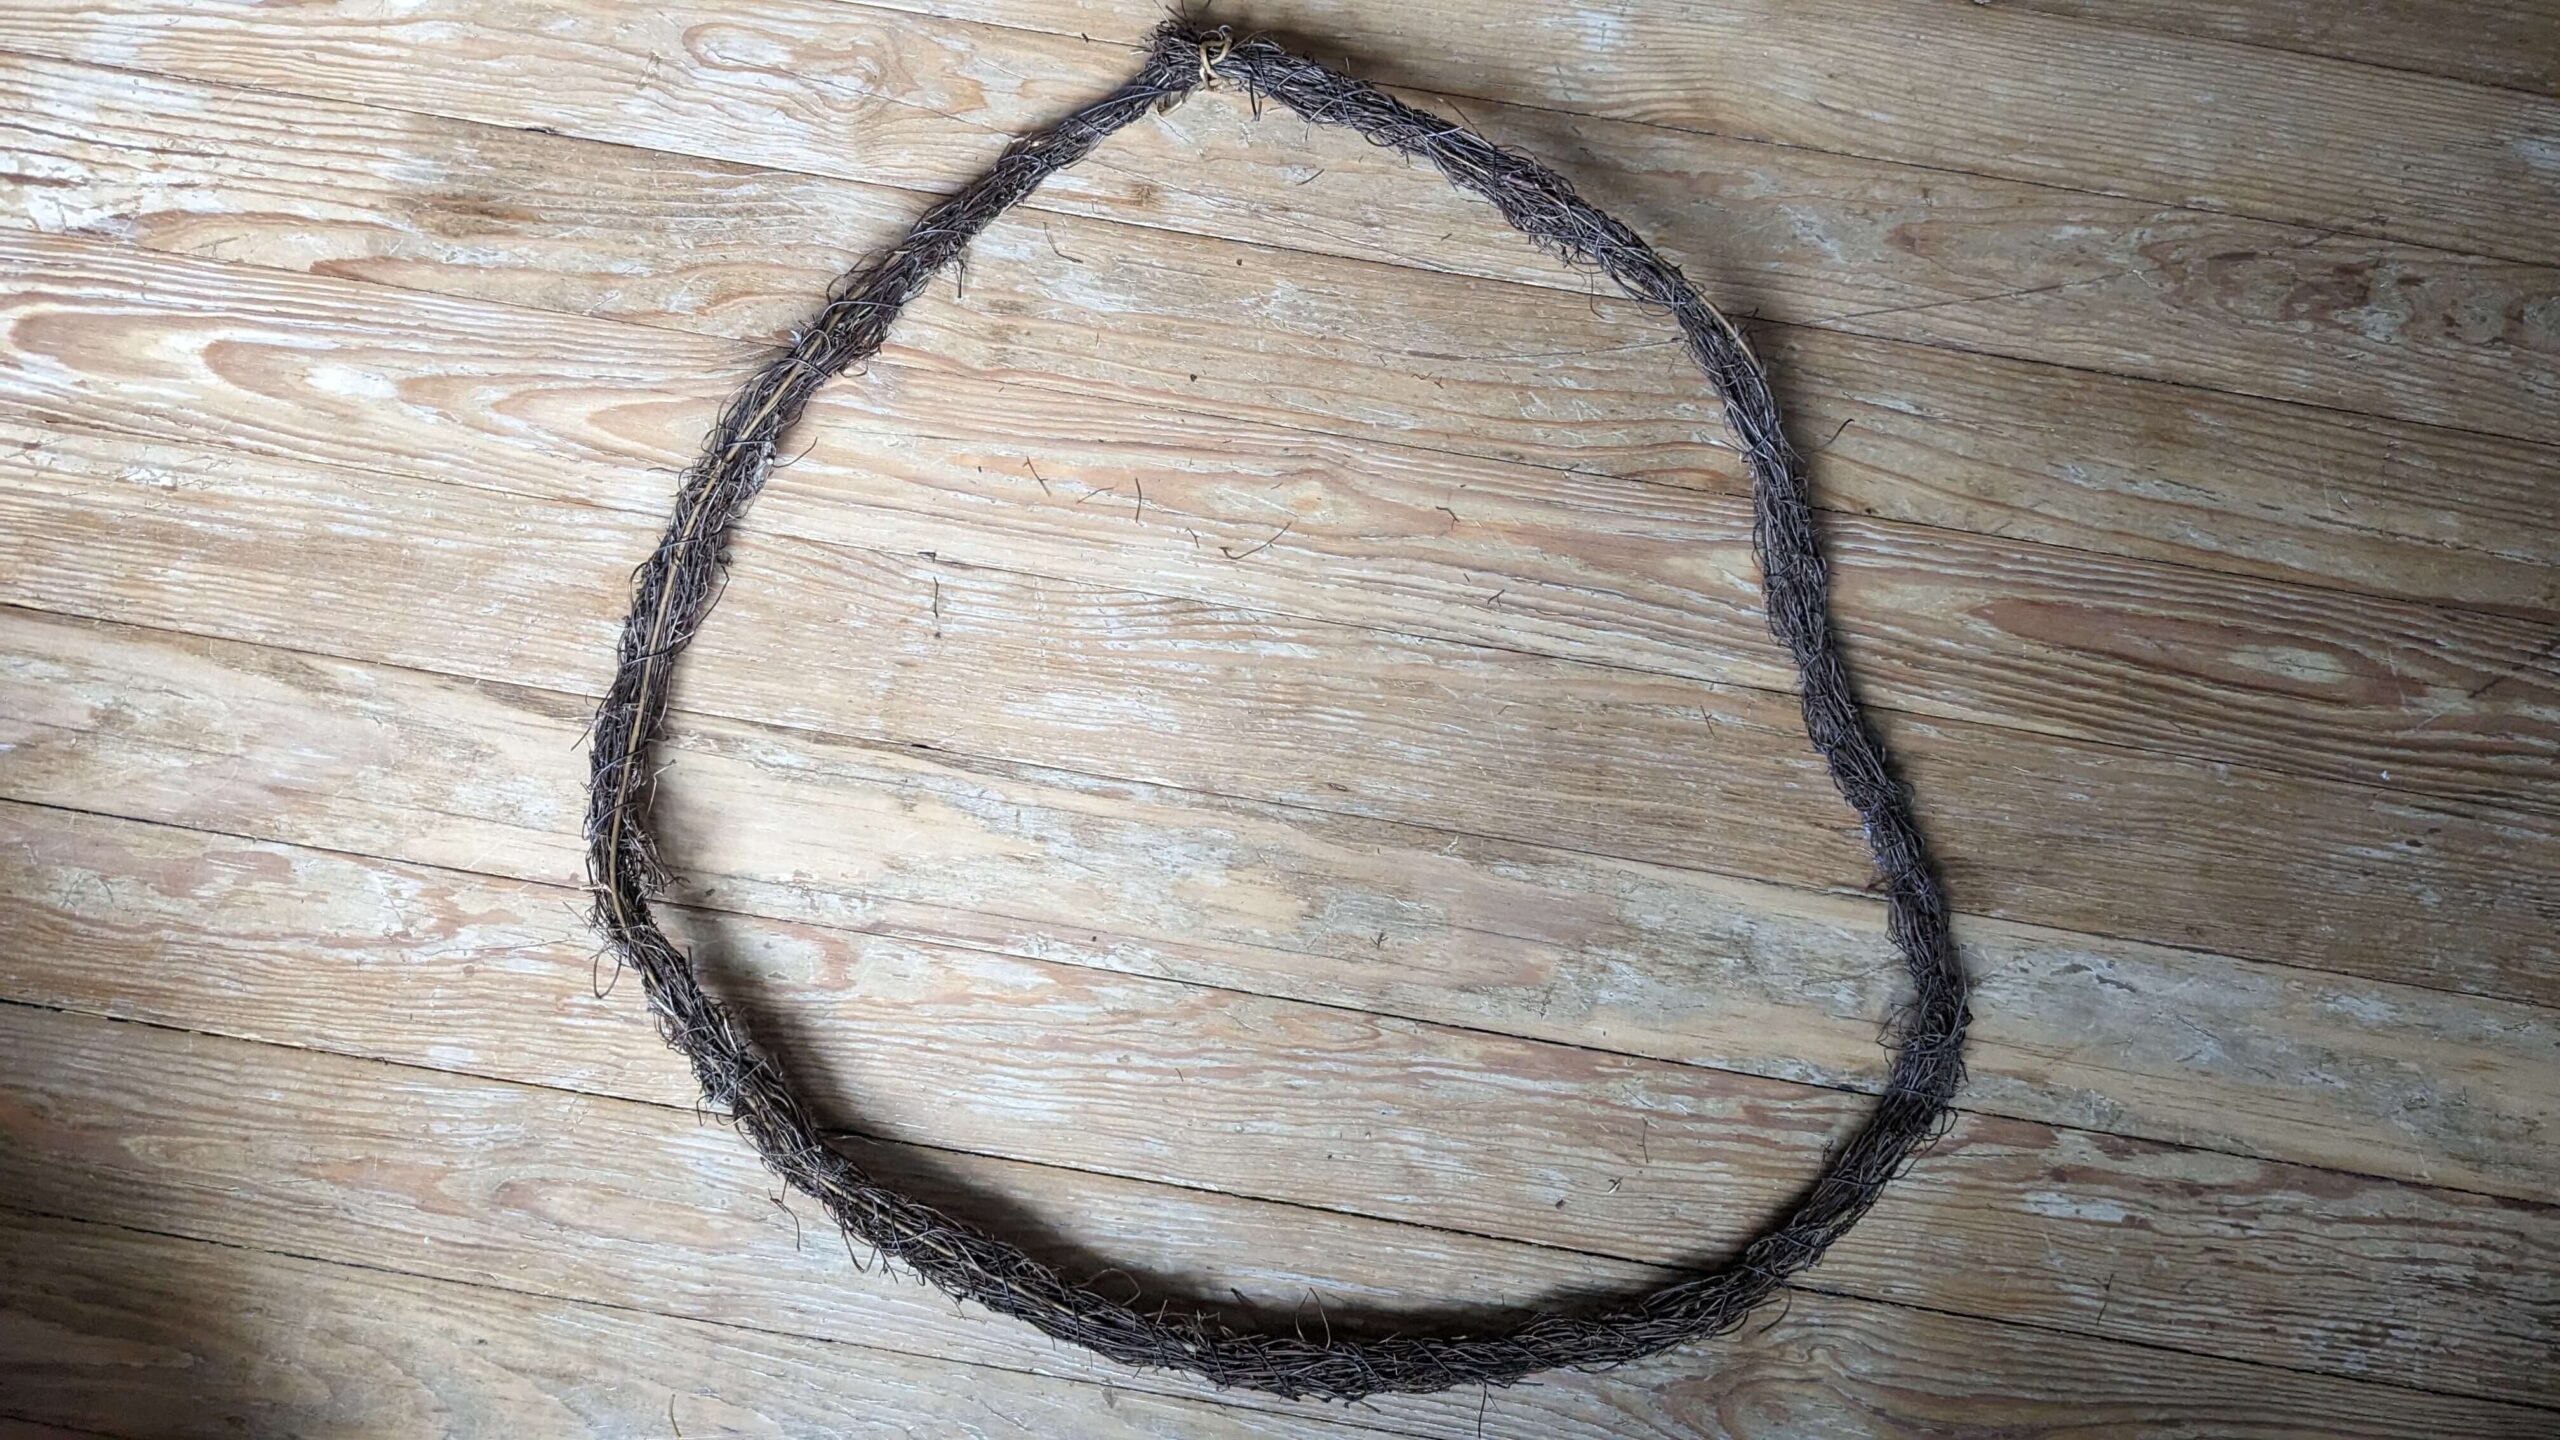 large wreath made of a fake grape vine on a wooden floor